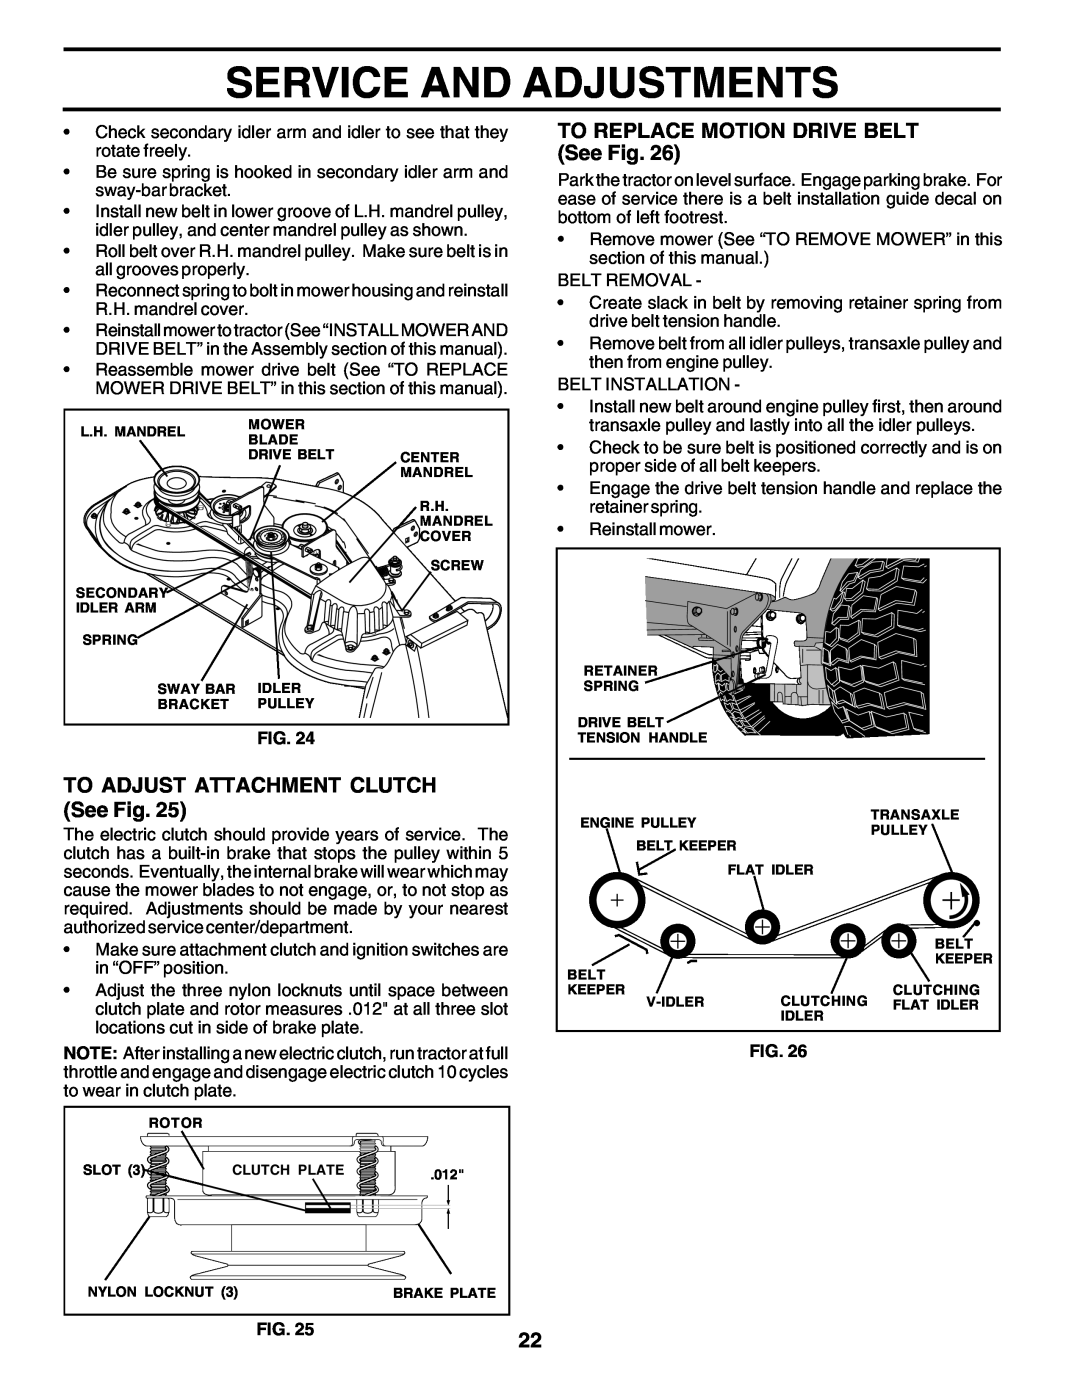 Poulan PRGT22H50D Service And Adjustments, TO ADJUST ATTACHMENT CLUTCH See Fig, TO REPLACE MOTION DRIVE BELT See Fig 